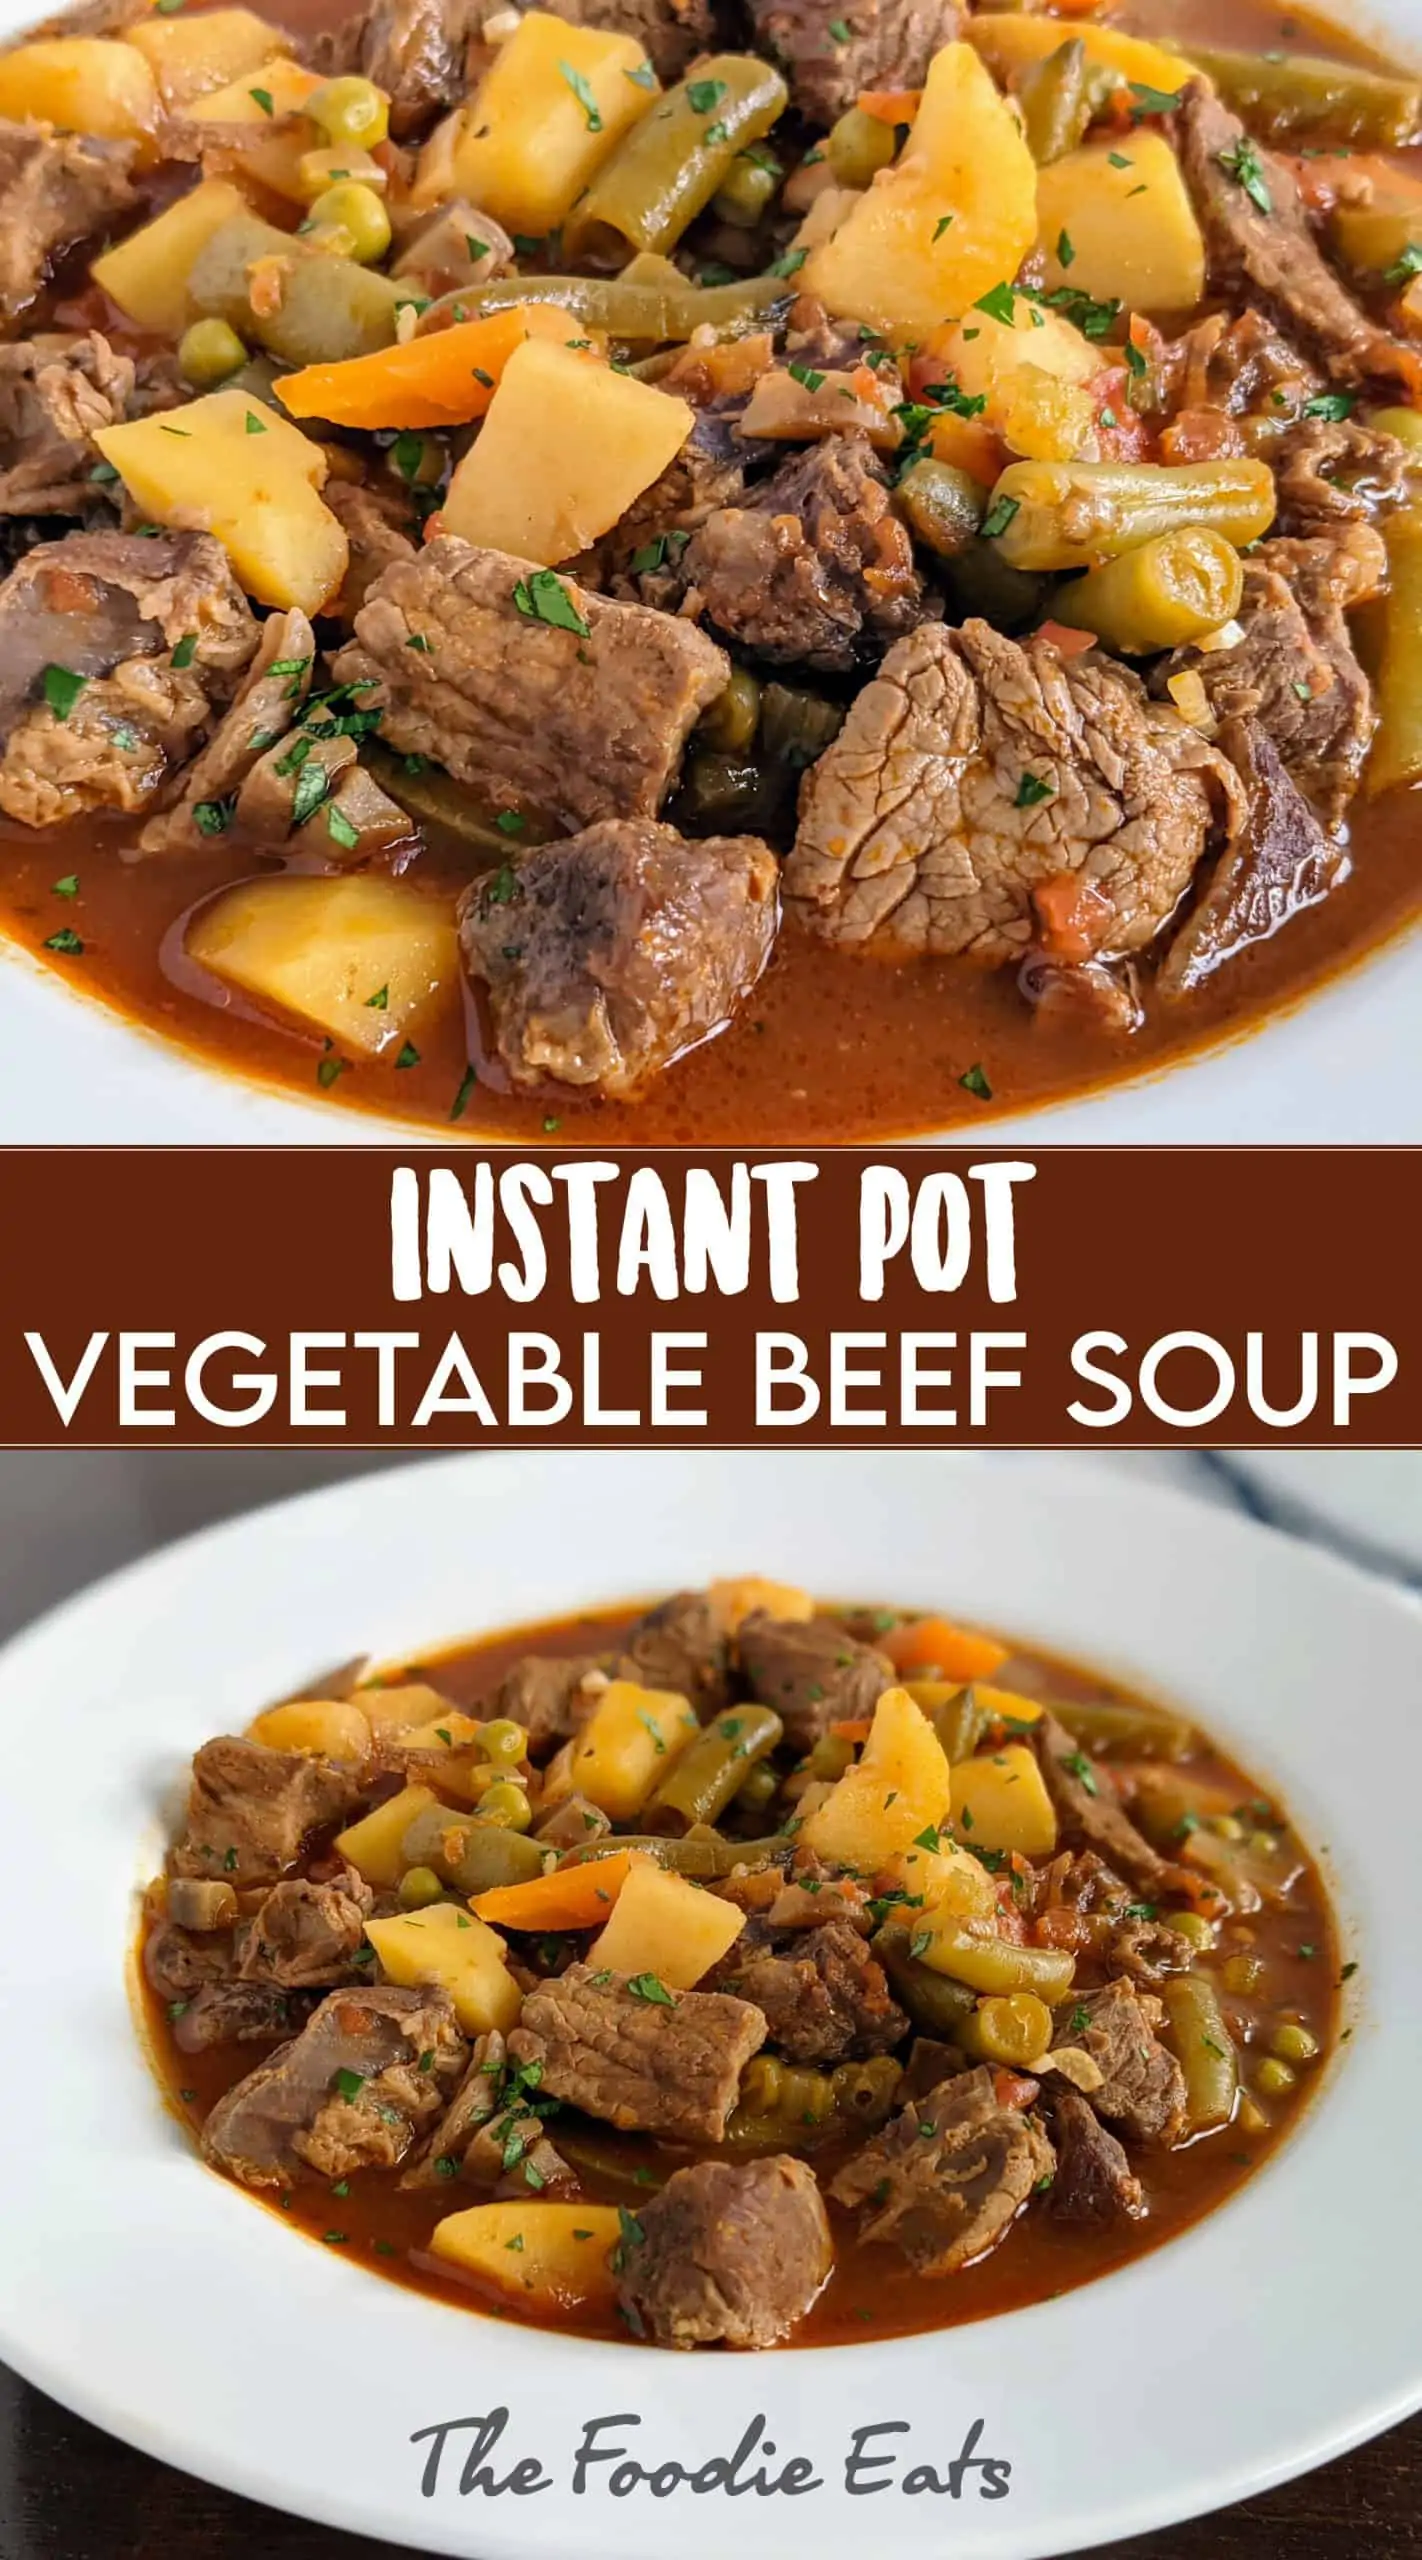 Instant Pot Vegetable Beef Soup - The Foodie Eats